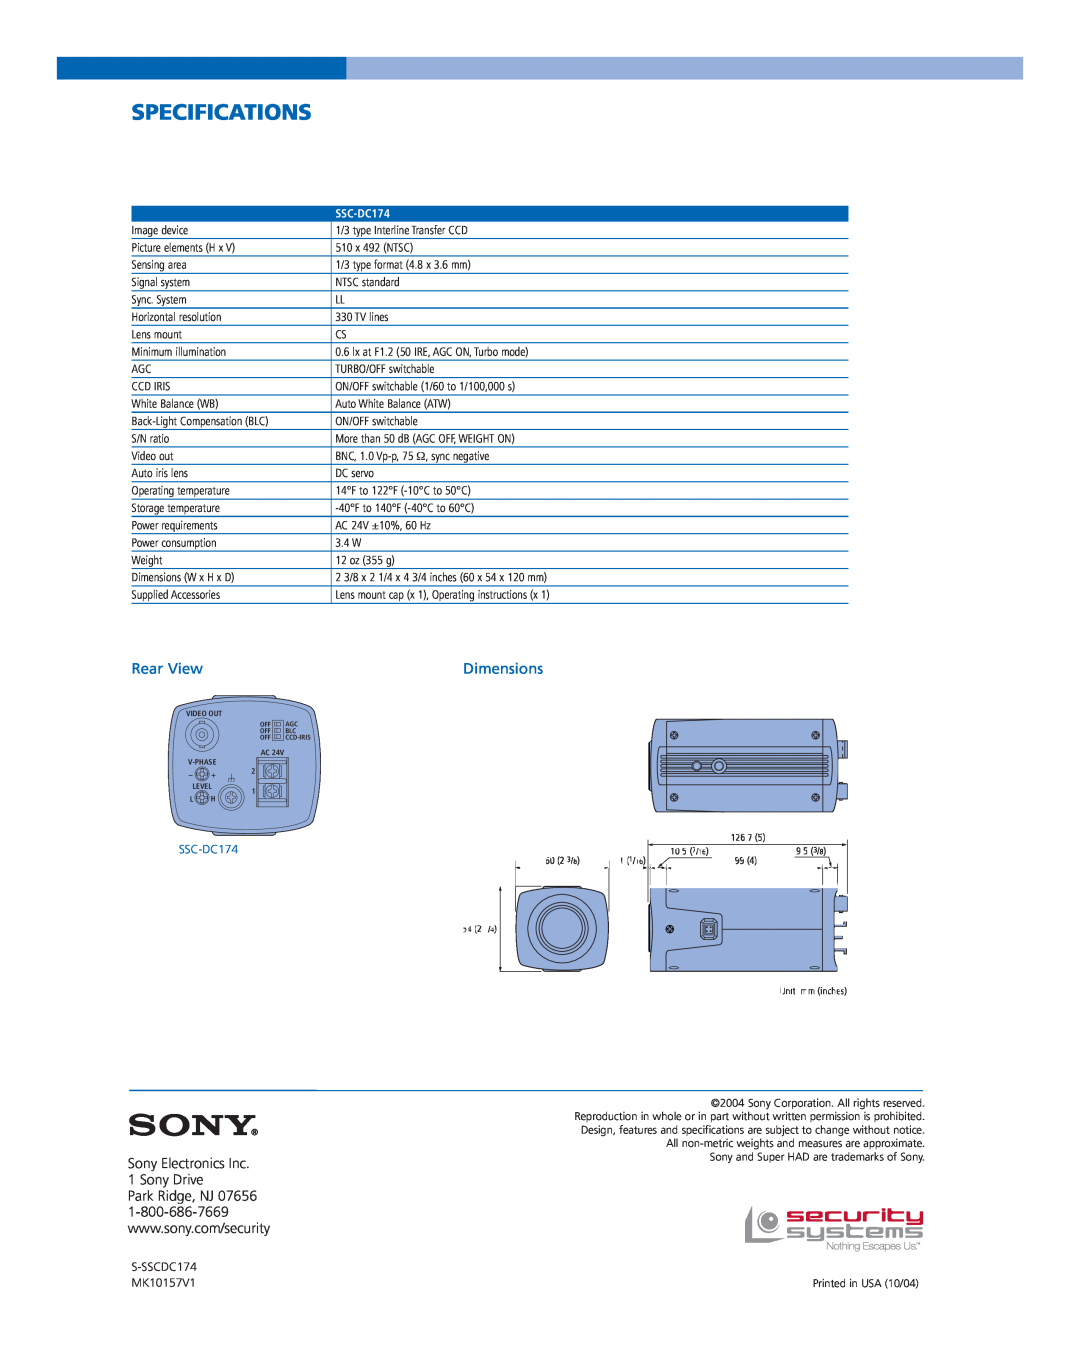 Sony SSCDC174 manual Specifications, Rear View, Dimensions, SSC-DC174 